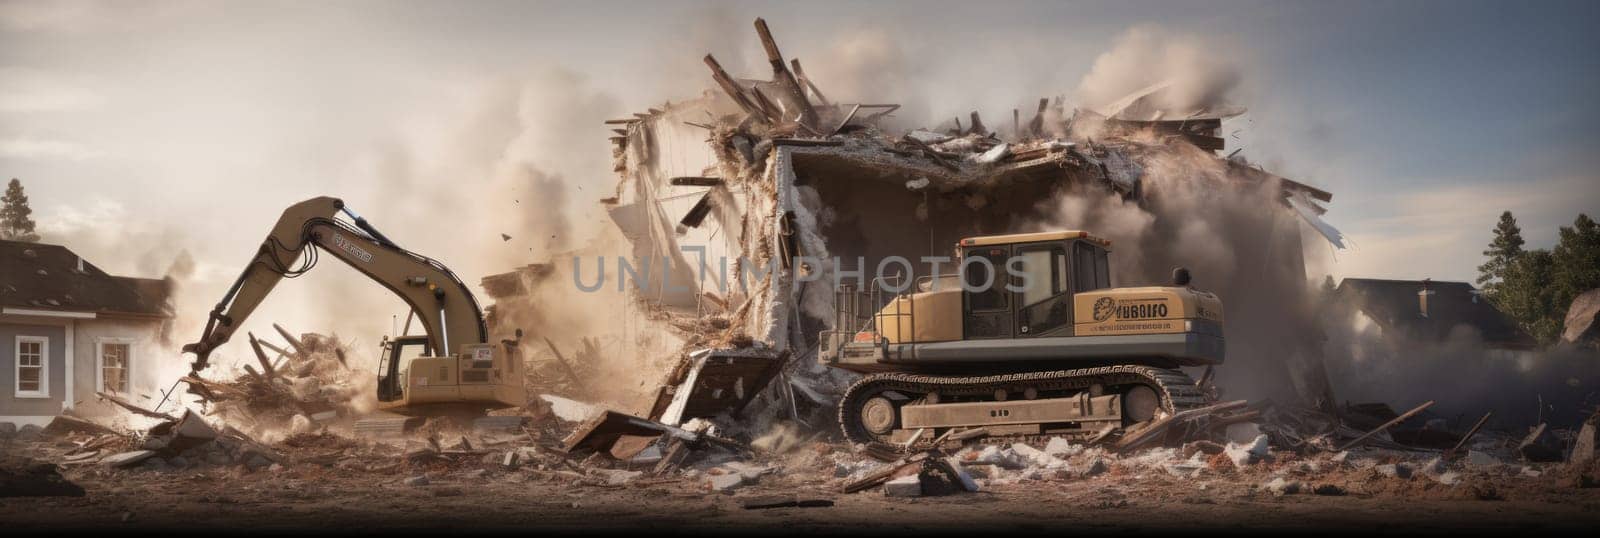 A bulldozer is seen actively excavating through a destroyed house during a demolition.